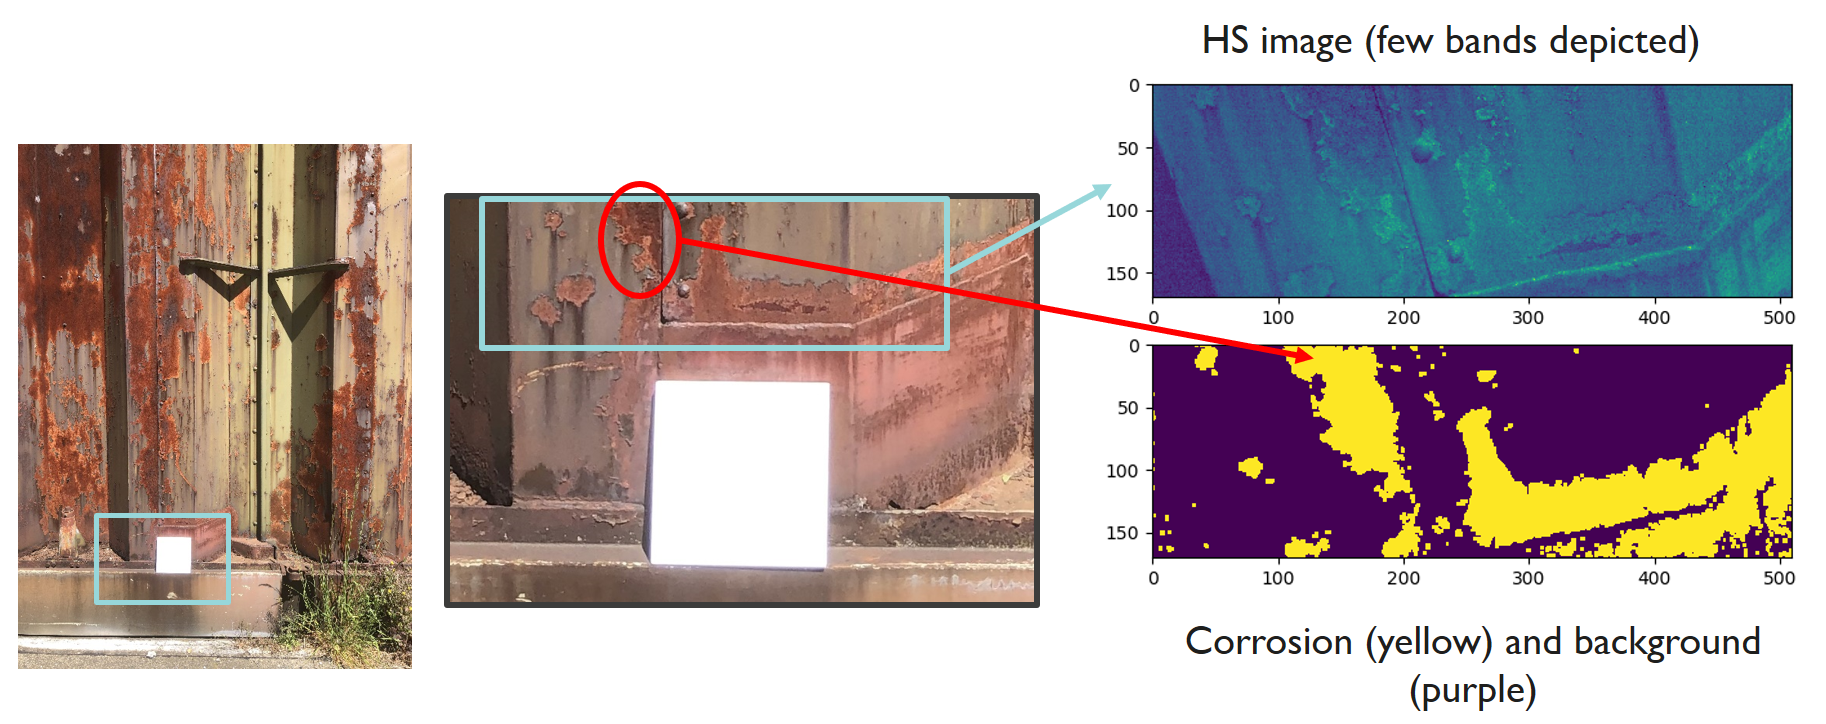 HSI-based corrosion detection